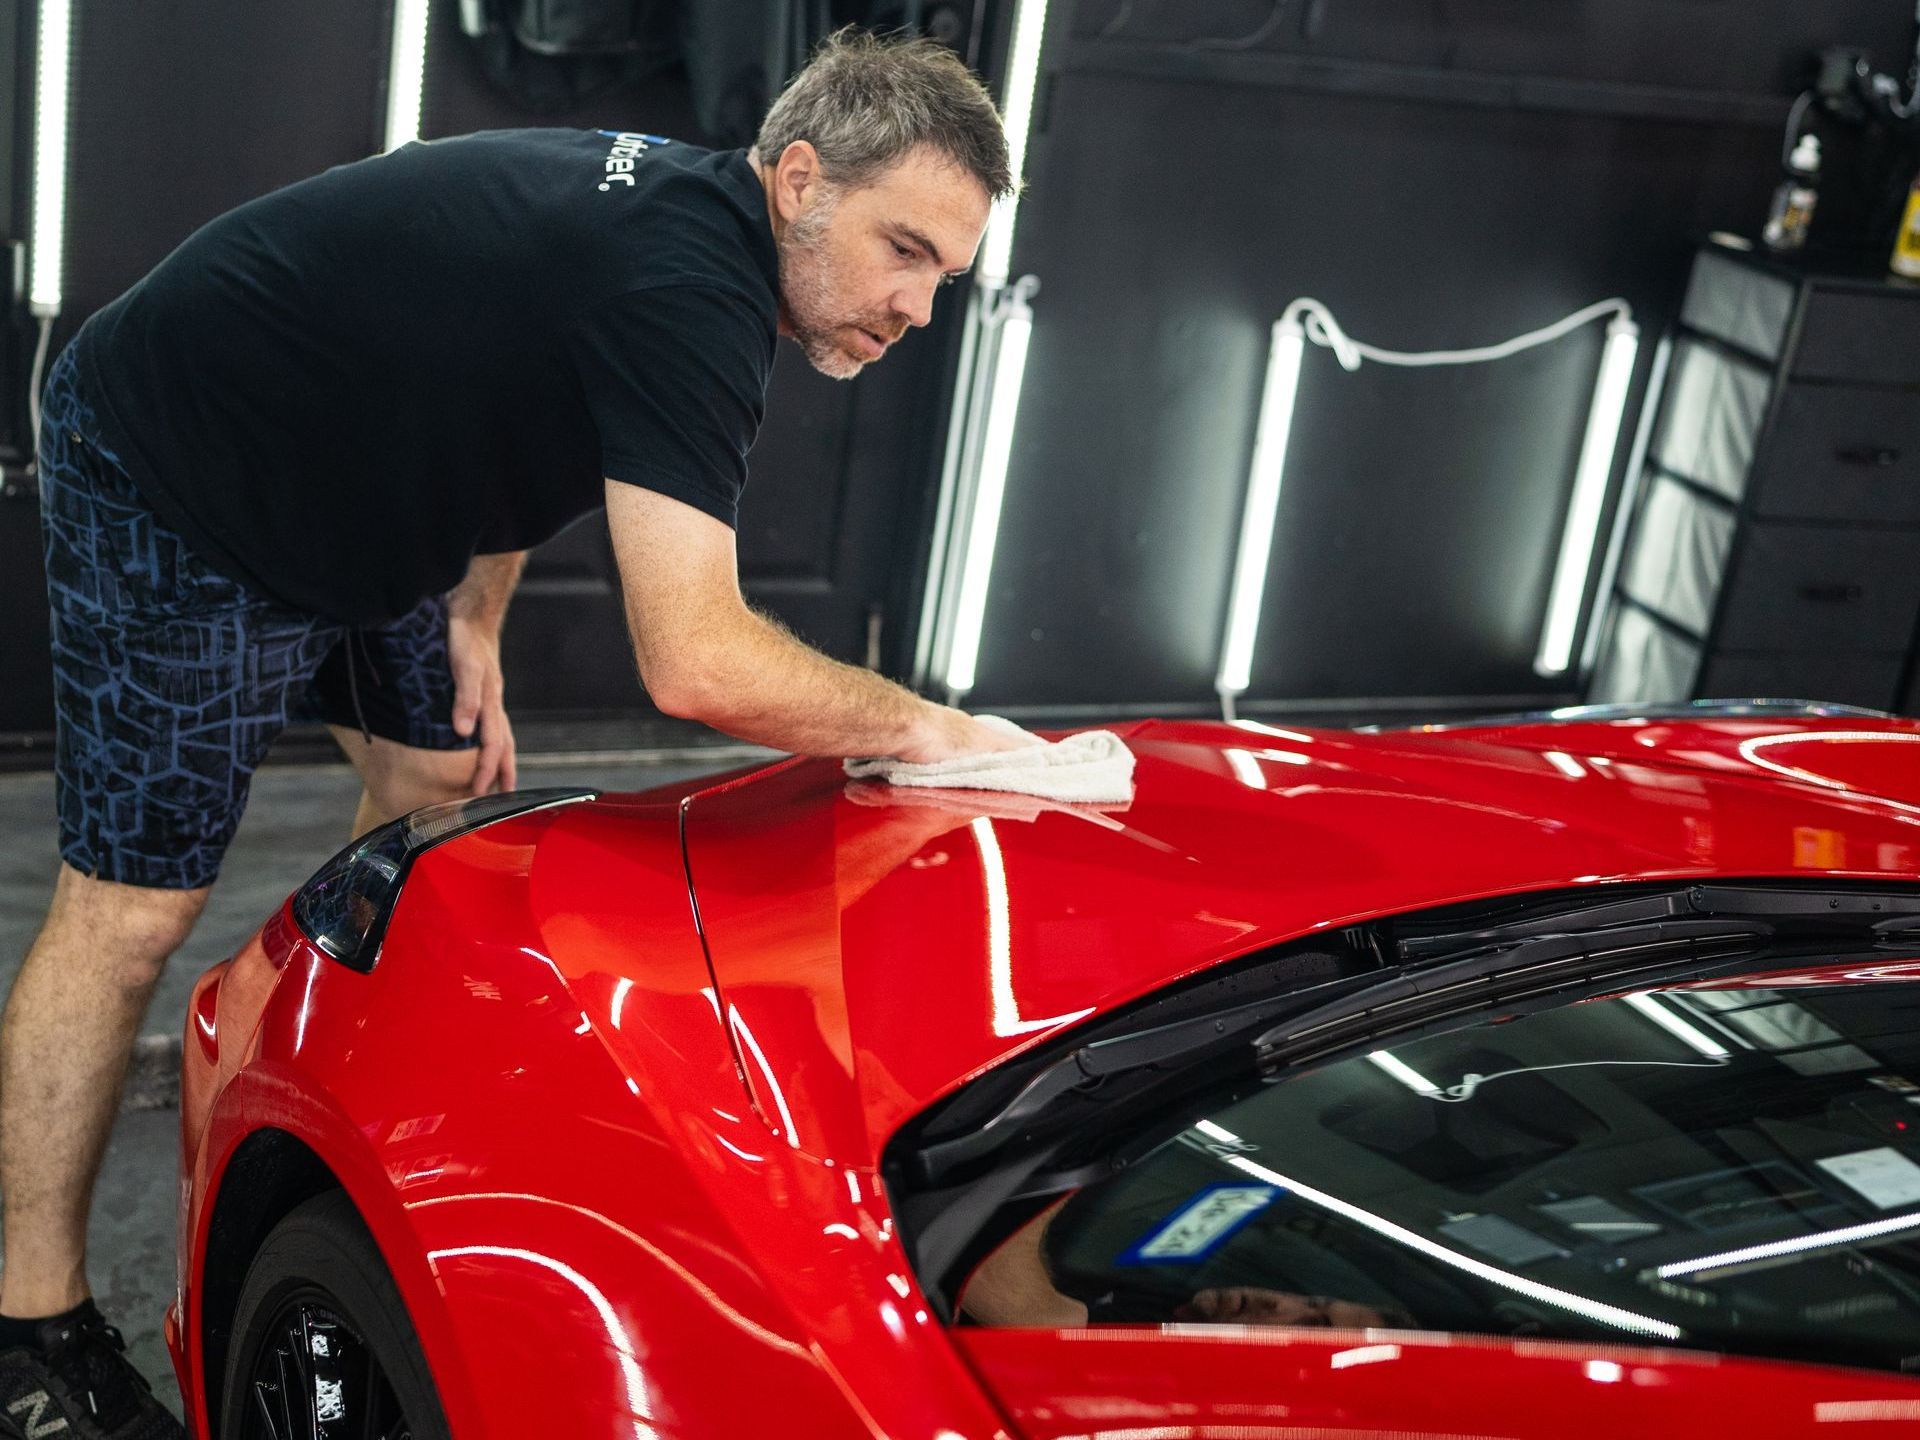 A man is cleaning a red sports car with a cloth.